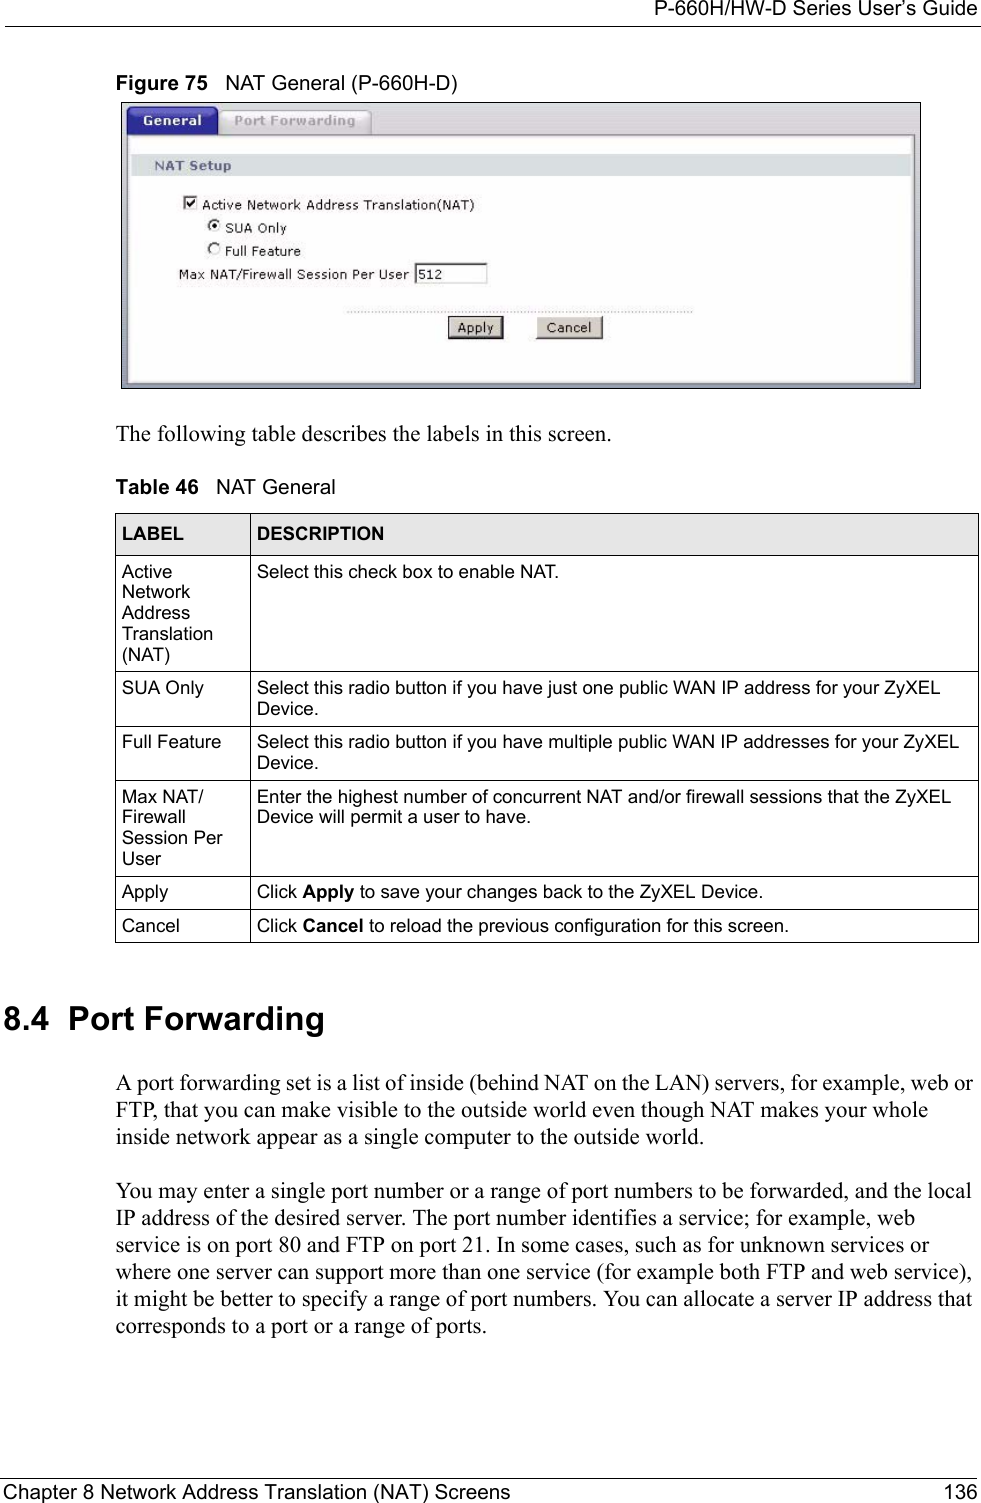 P-660H/HW-D Series User’s GuideChapter 8 Network Address Translation (NAT) Screens 136Figure 75   NAT General (P-660H-D) The following table describes the labels in this screen. 8.4  Port Forwarding  A port forwarding set is a list of inside (behind NAT on the LAN) servers, for example, web or FTP, that you can make visible to the outside world even though NAT makes your whole inside network appear as a single computer to the outside world. You may enter a single port number or a range of port numbers to be forwarded, and the local IP address of the desired server. The port number identifies a service; for example, web service is on port 80 and FTP on port 21. In some cases, such as for unknown services or where one server can support more than one service (for example both FTP and web service), it might be better to specify a range of port numbers. You can allocate a server IP address that corresponds to a port or a range of ports.Table 46   NAT GeneralLABEL DESCRIPTIONActive Network Address Translation (NAT)Select this check box to enable NAT.SUA Only Select this radio button if you have just one public WAN IP address for your ZyXEL Device. Full Feature  Select this radio button if you have multiple public WAN IP addresses for your ZyXEL Device. Max NAT/Firewall Session Per UserEnter the highest number of concurrent NAT and/or firewall sessions that the ZyXEL Device will permit a user to have.Apply Click Apply to save your changes back to the ZyXEL Device.Cancel Click Cancel to reload the previous configuration for this screen.